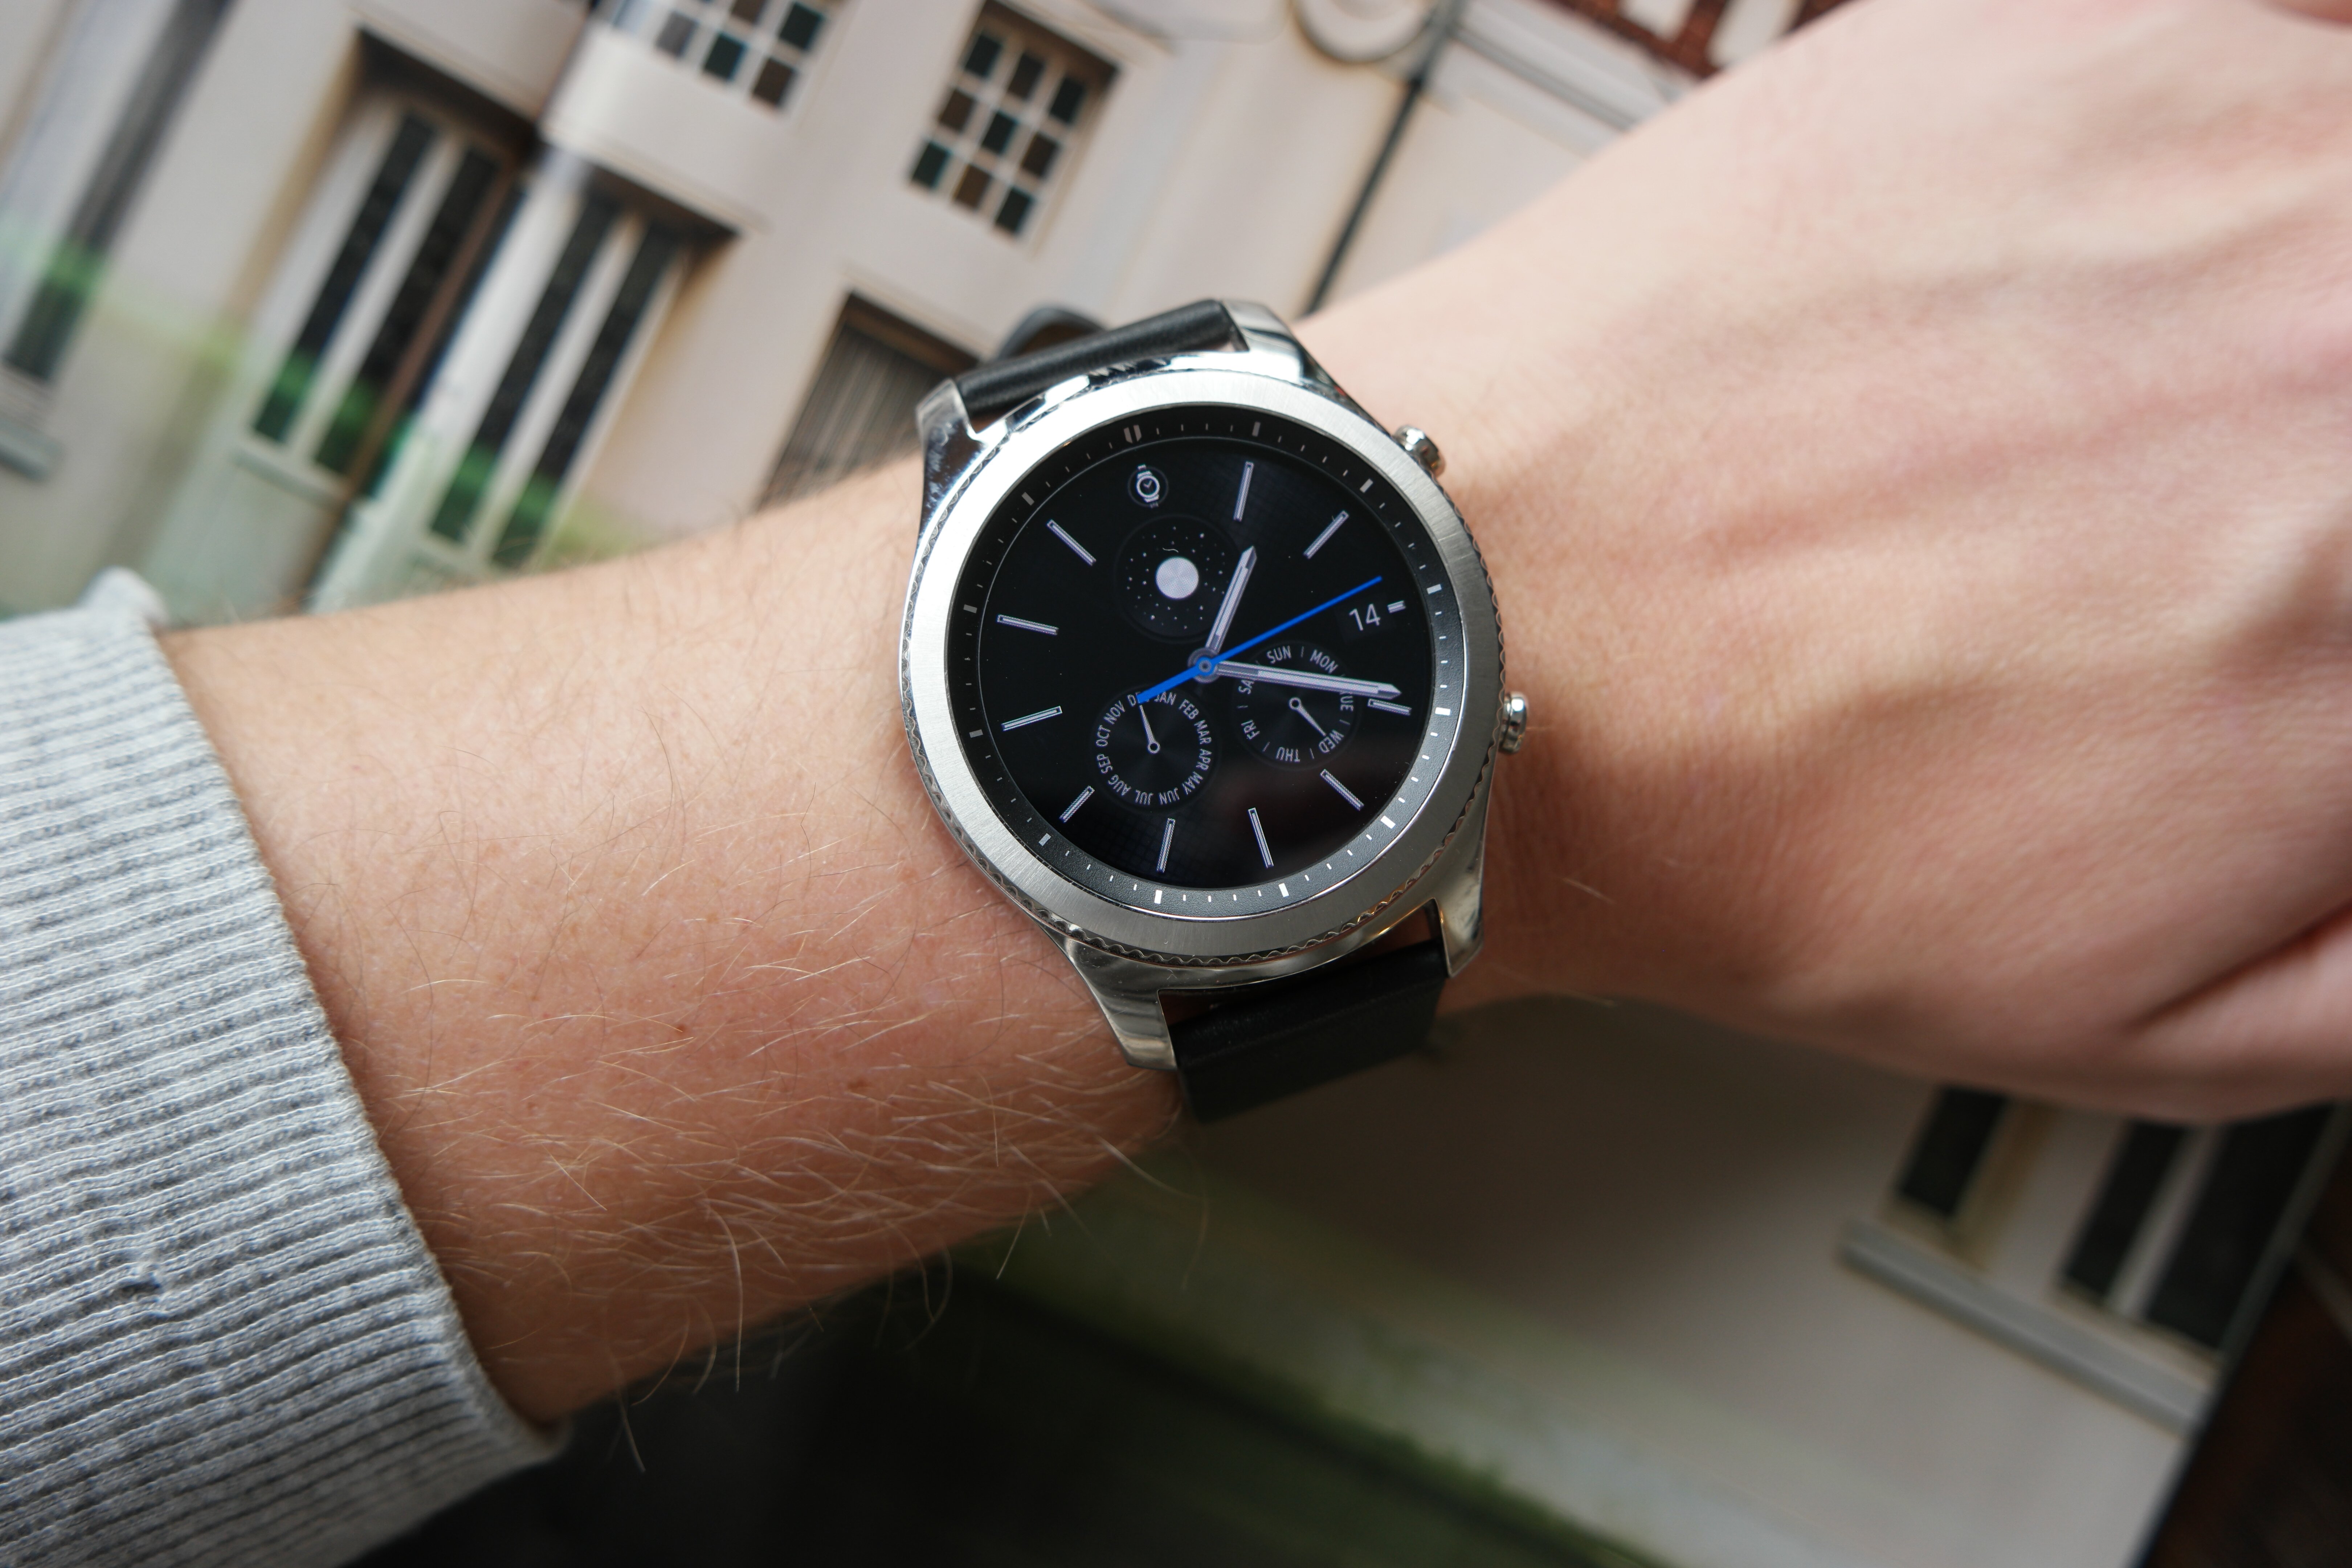 Samsung Gear S3 classic review: The smartwatch we've all waiting for - - SamMobile